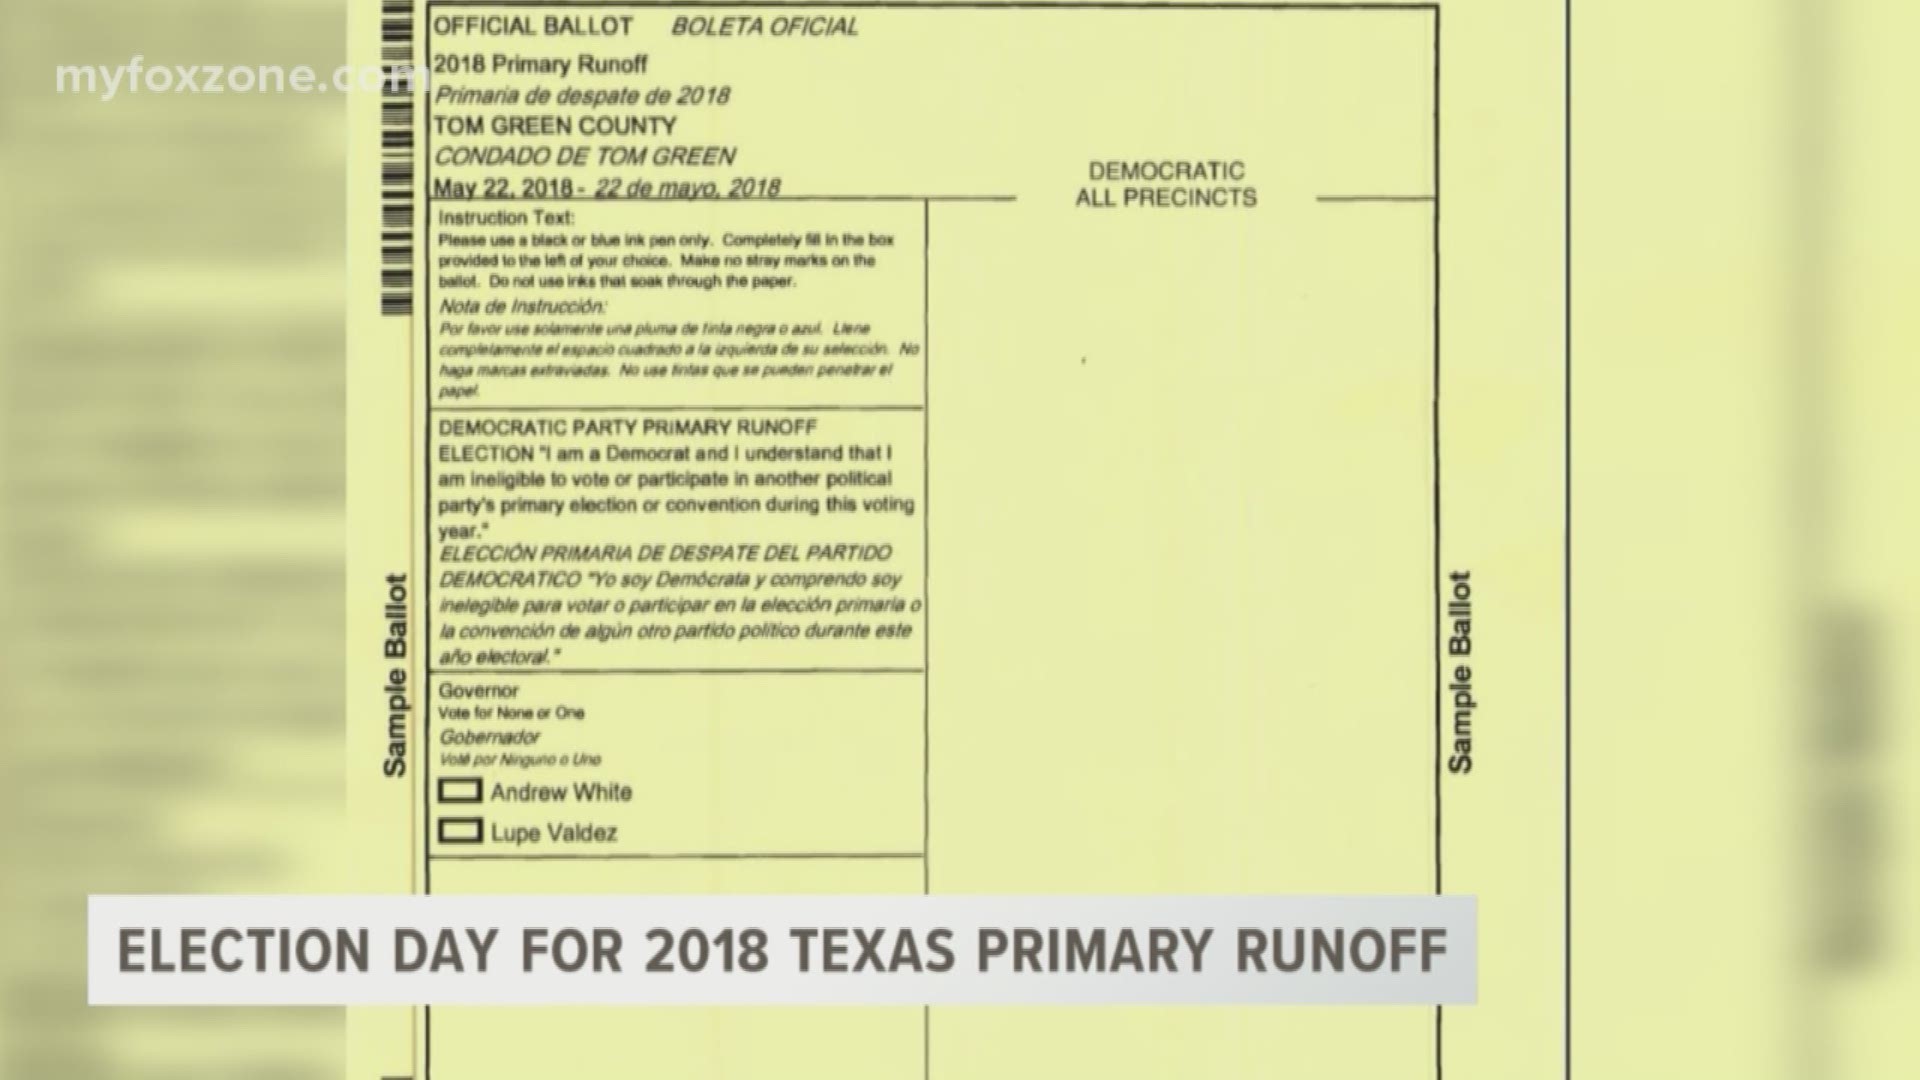 Our Malik Mingo shares details on what you need to know for the May 22nd Texas primaries runoff election.